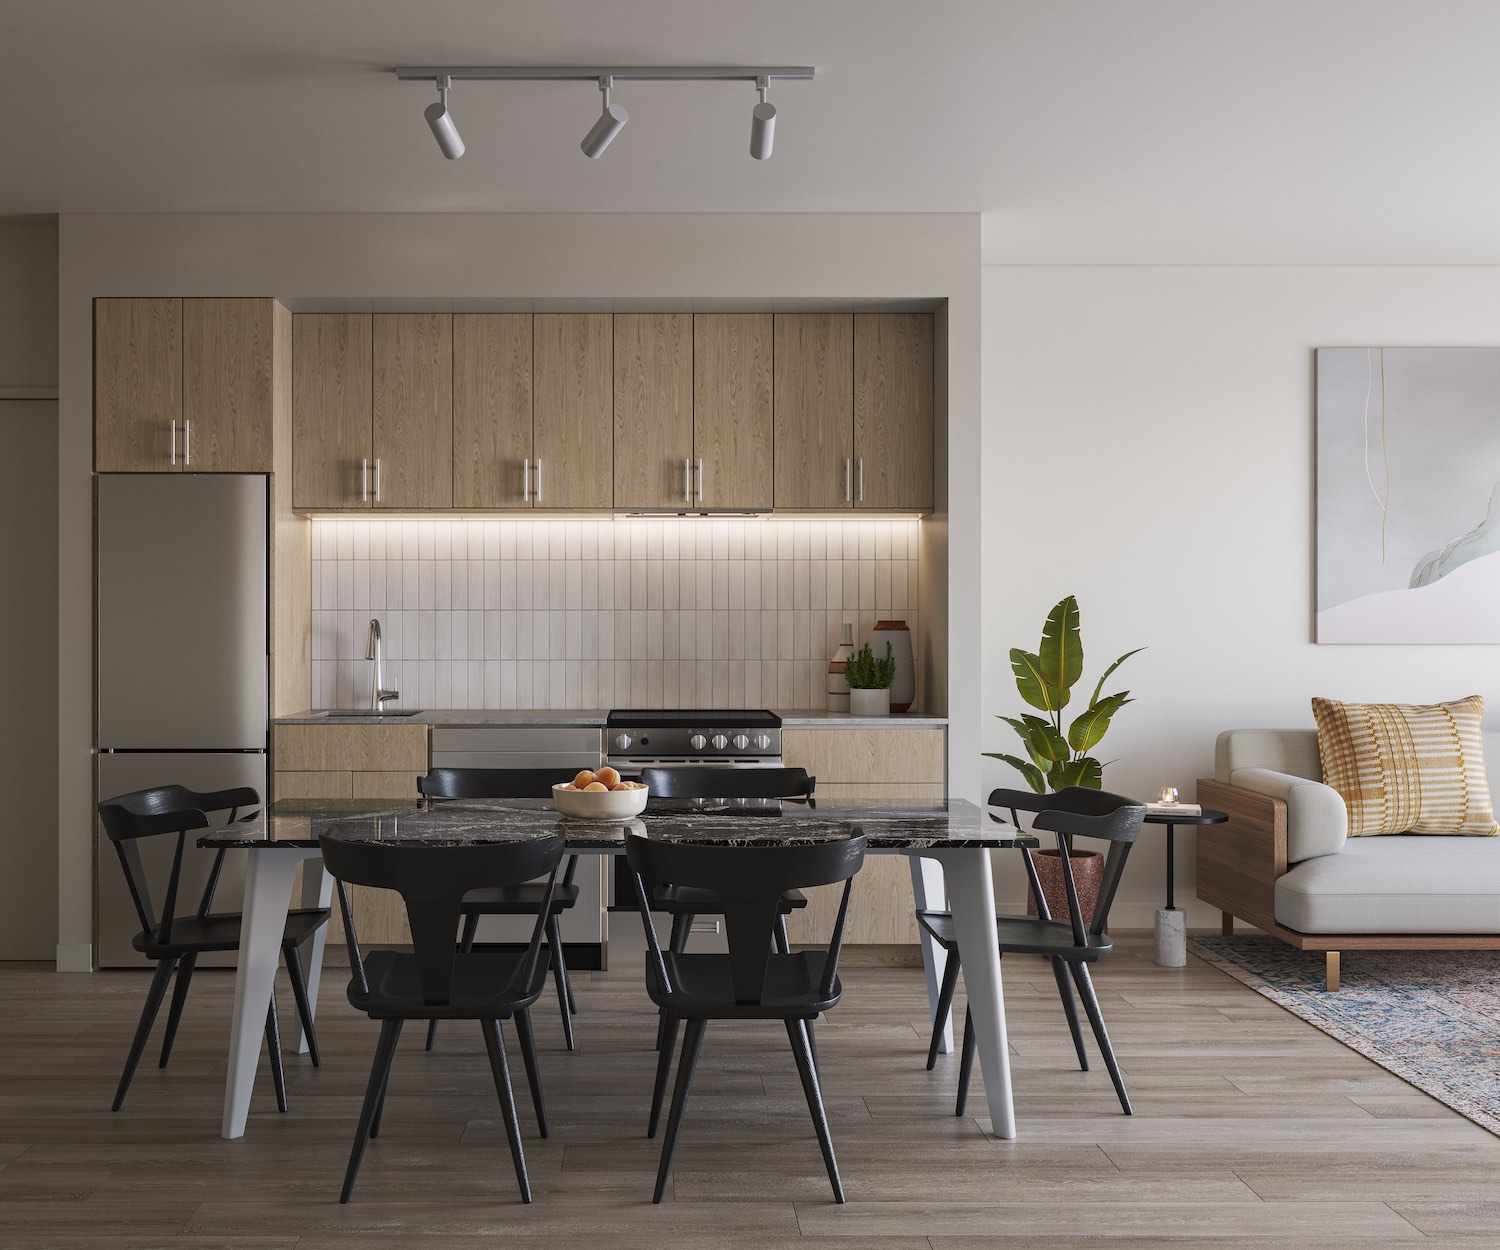 Westbend Residences by Mattamy at Bloor & Keele